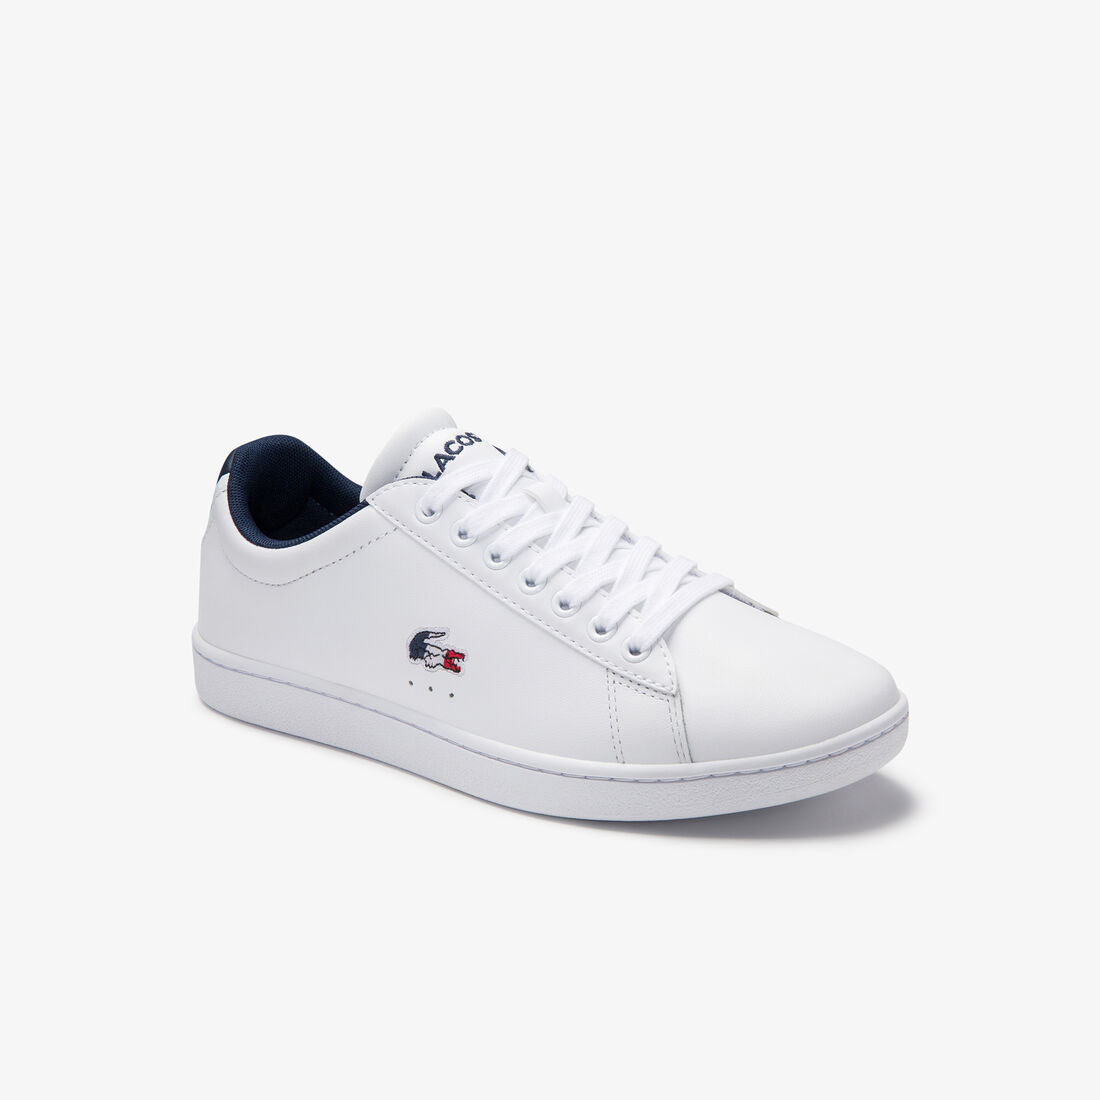 Women's Carnaby Evo Tricolore Leather and Synthetic Trainers